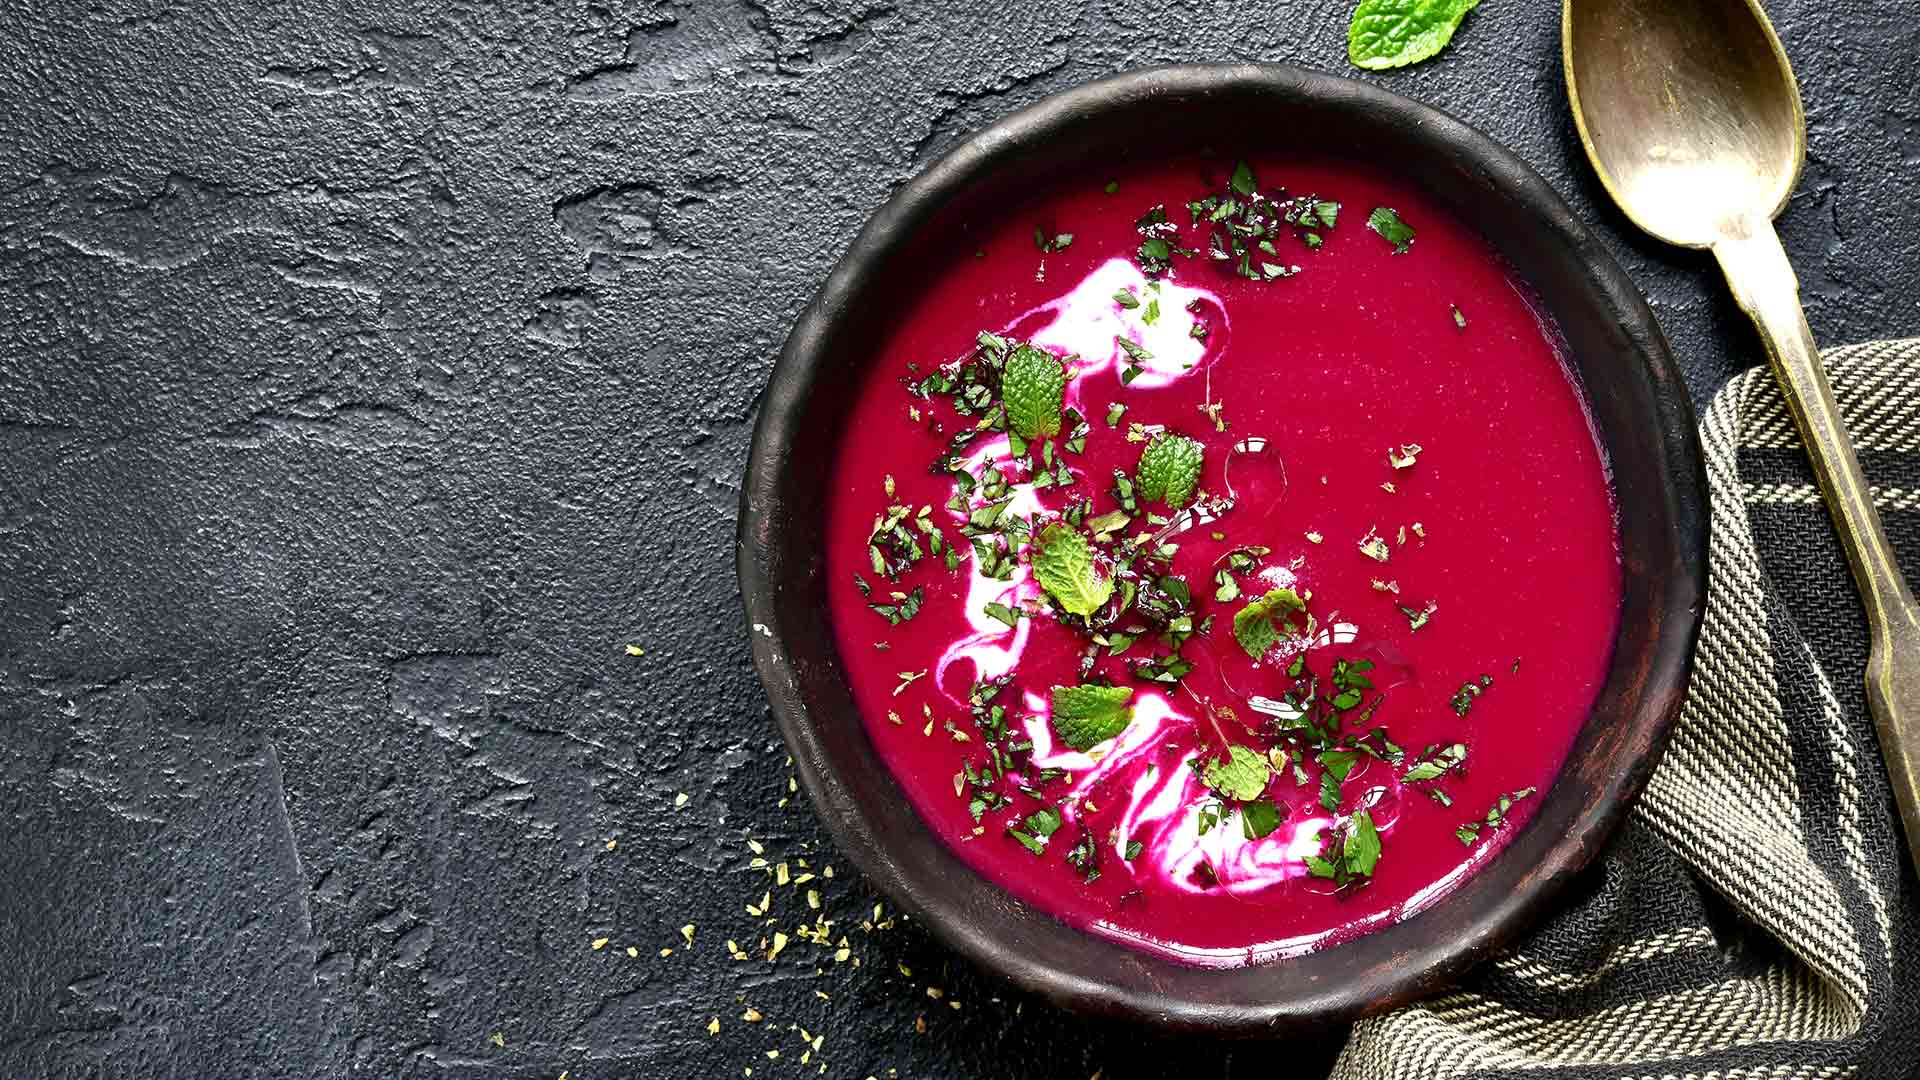 Beetroot can protect against cancer, these five ways to include it in your diet